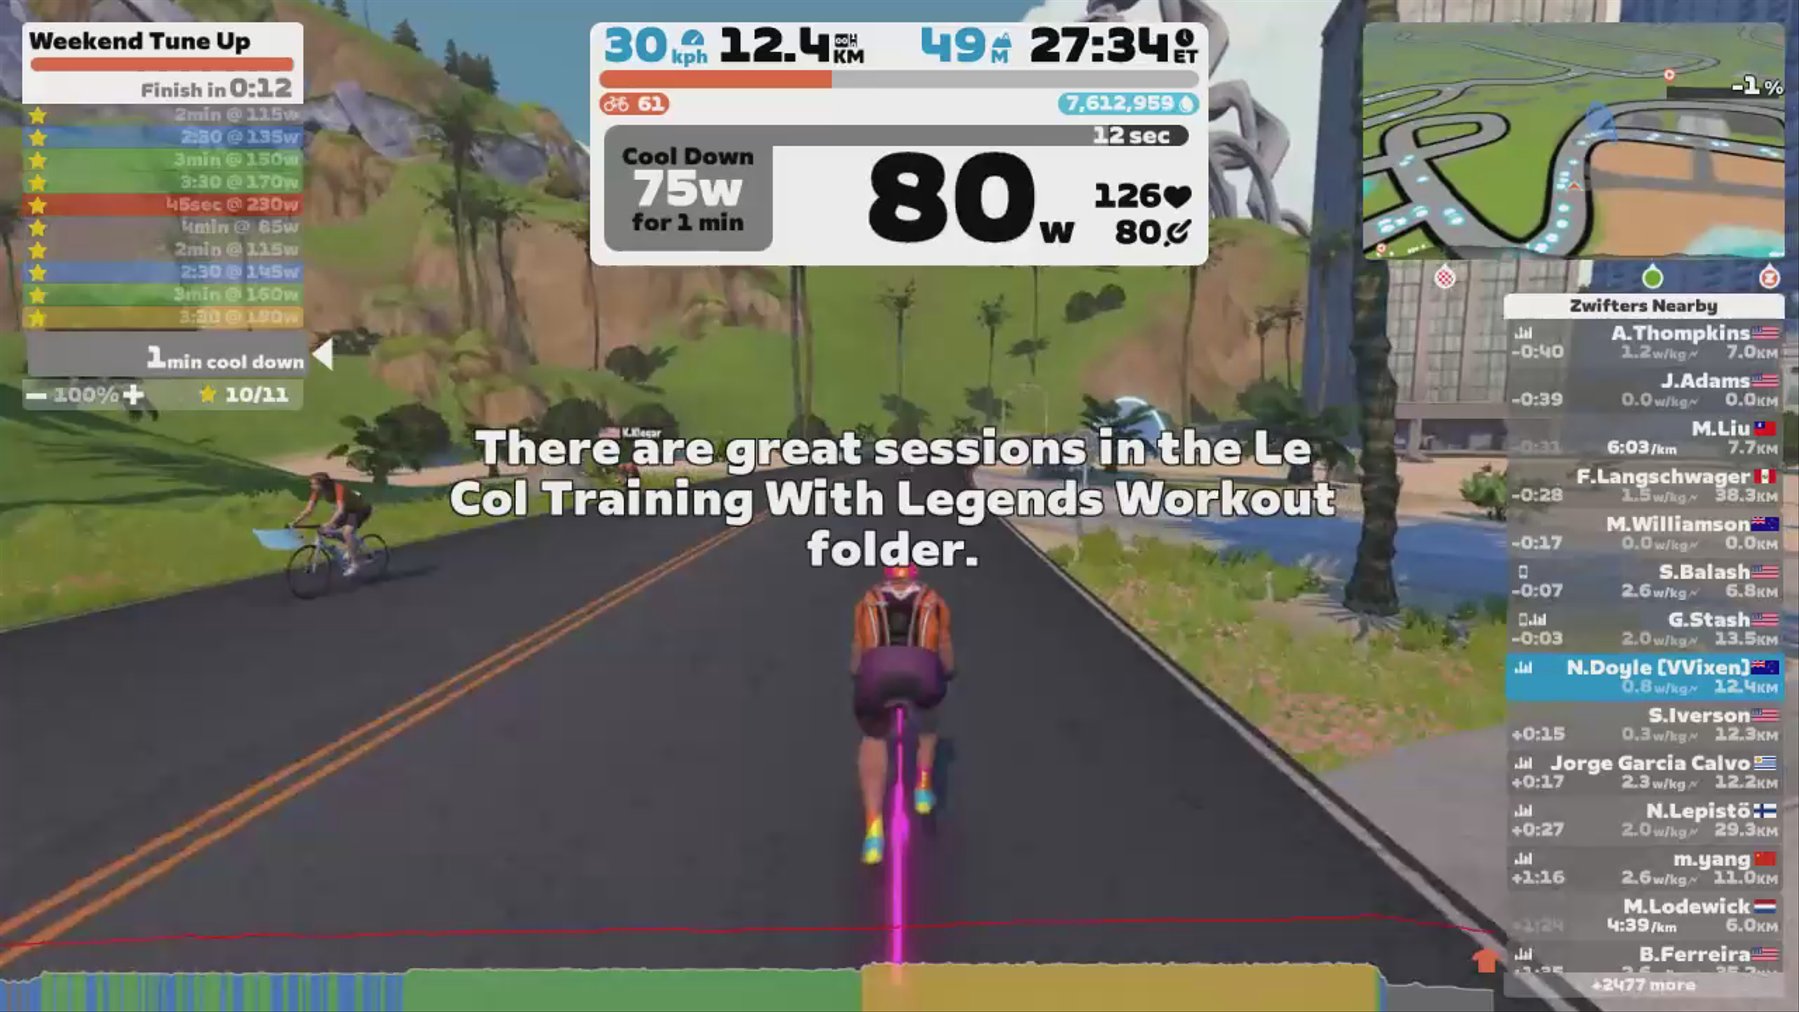 Zwift - Le Col - Training With Legends - Fabian Cancellara - Weekend Tune Up in Watopia